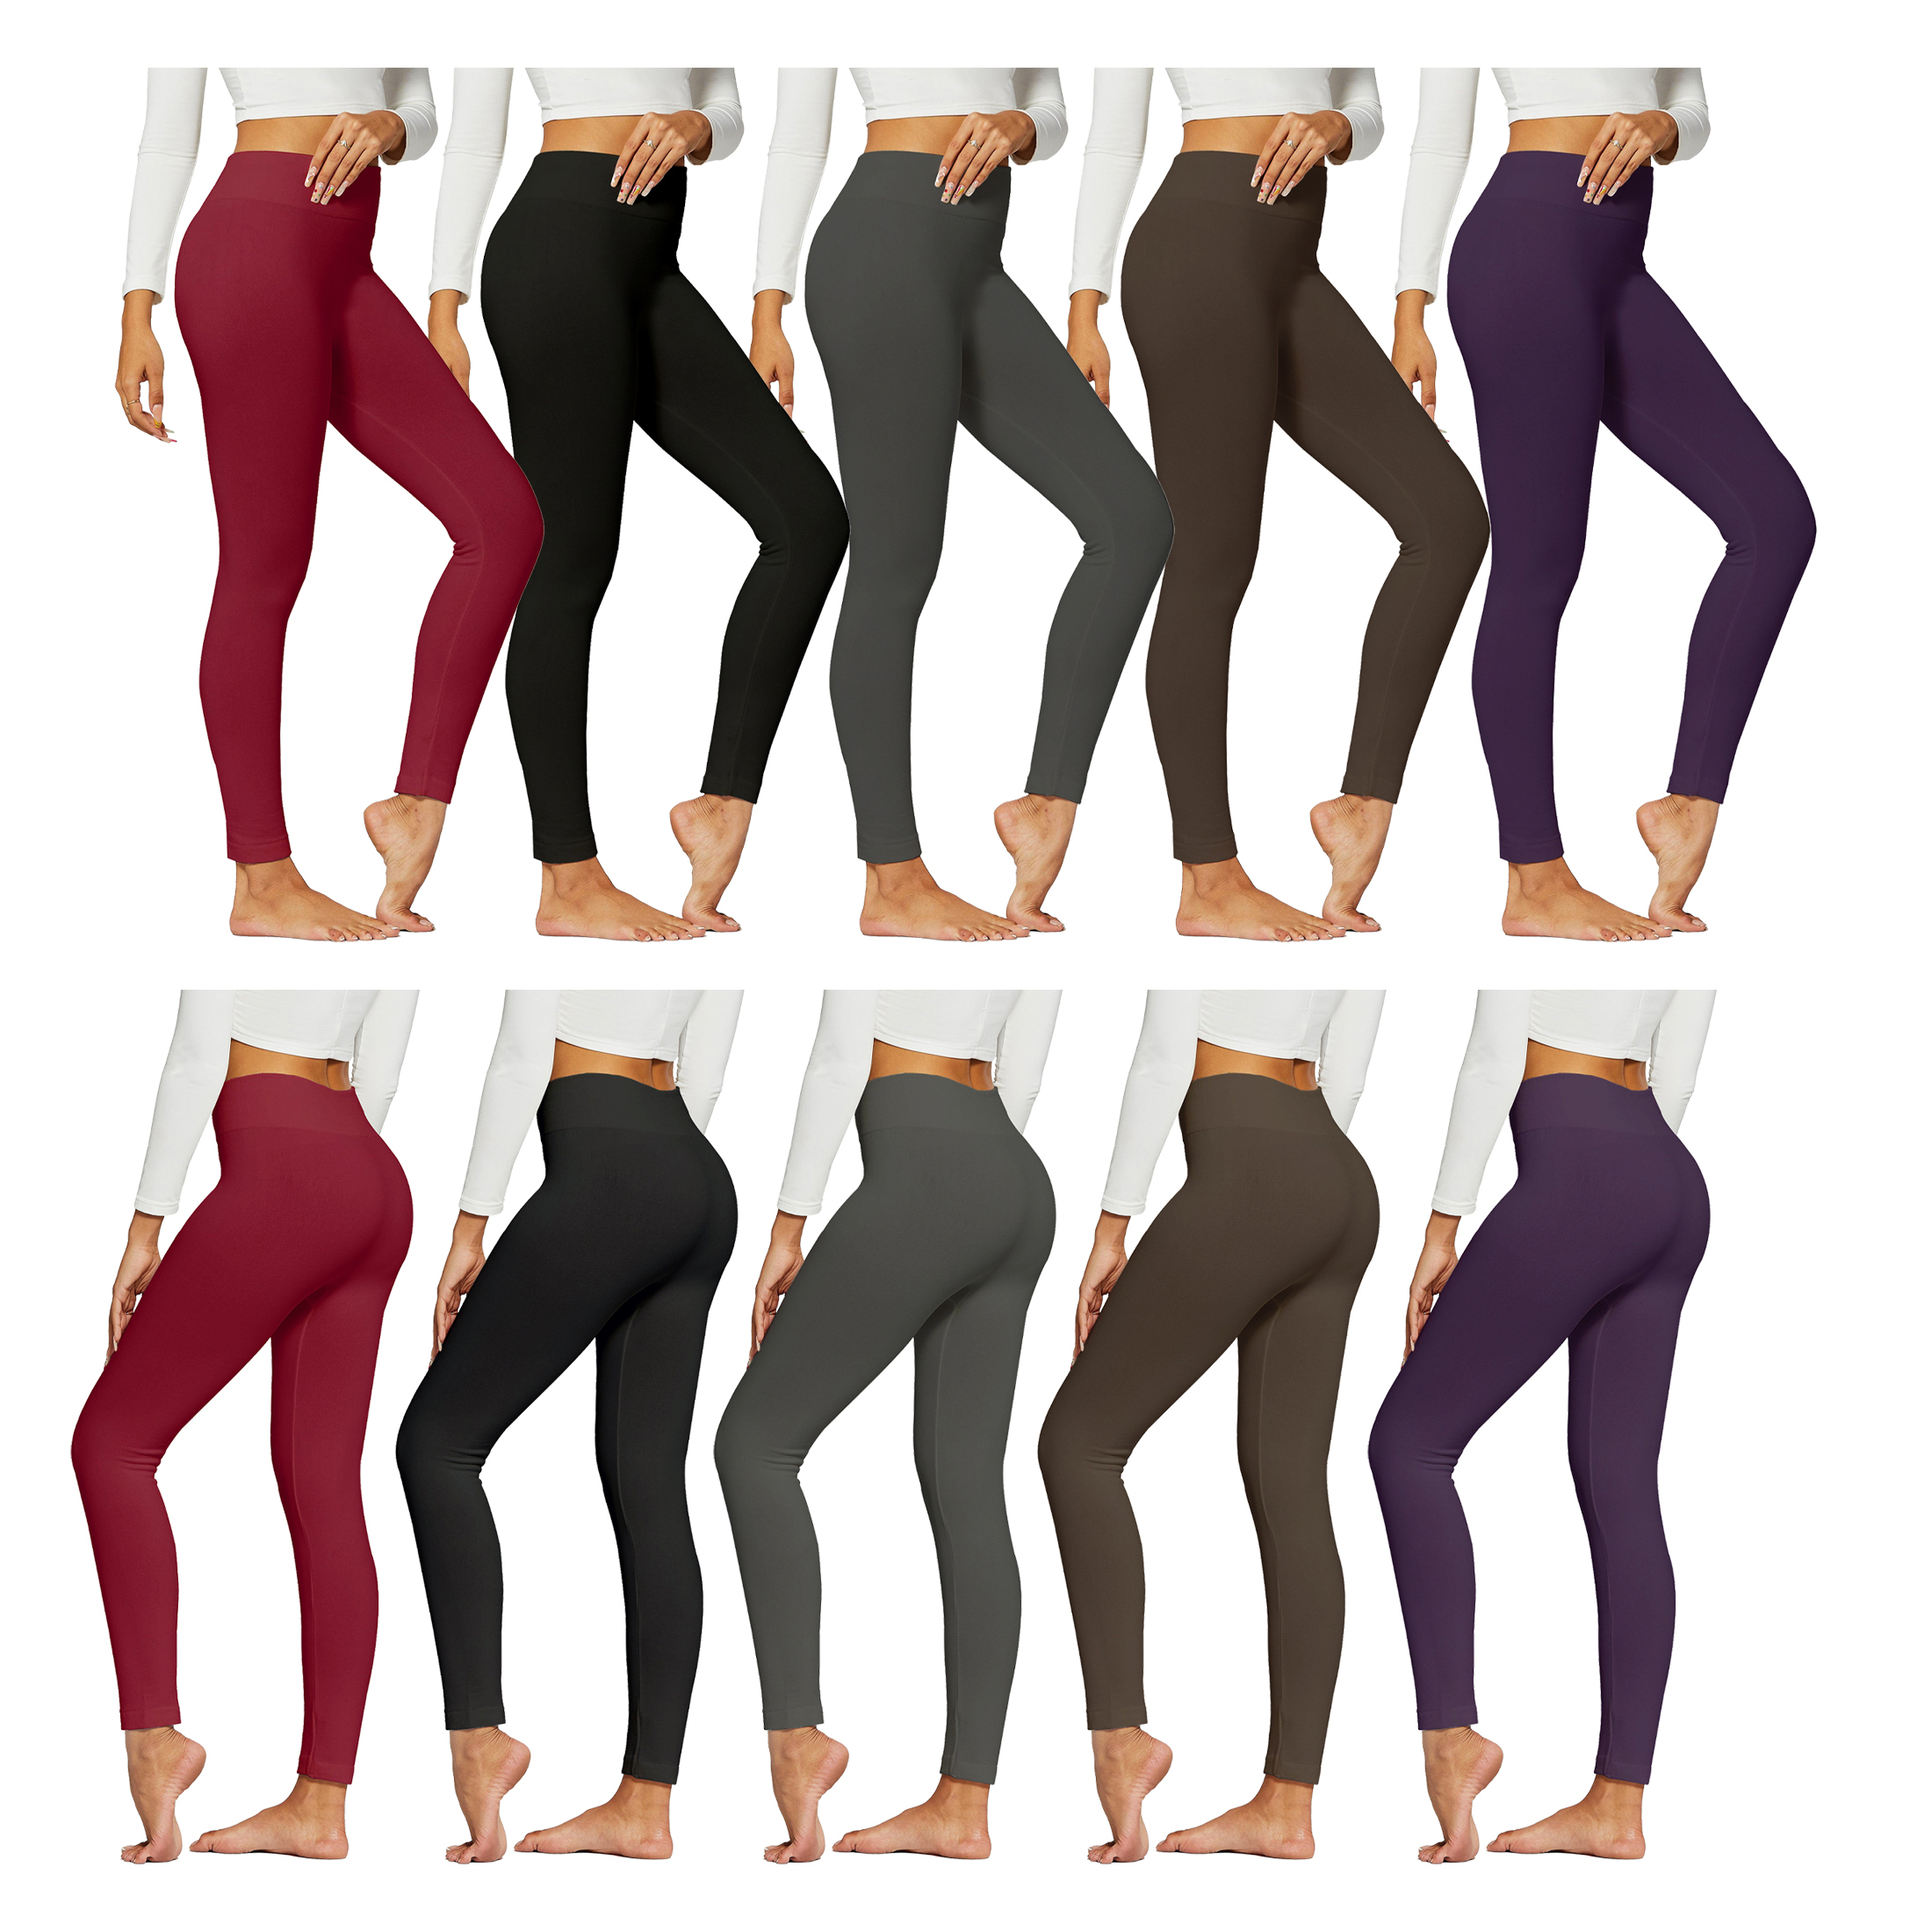 3-Pack:Women's Premium Quality High-Waist Fleece-Lined Leggings (Plus Size Available) - Black, Grey & Red, 1X/2X